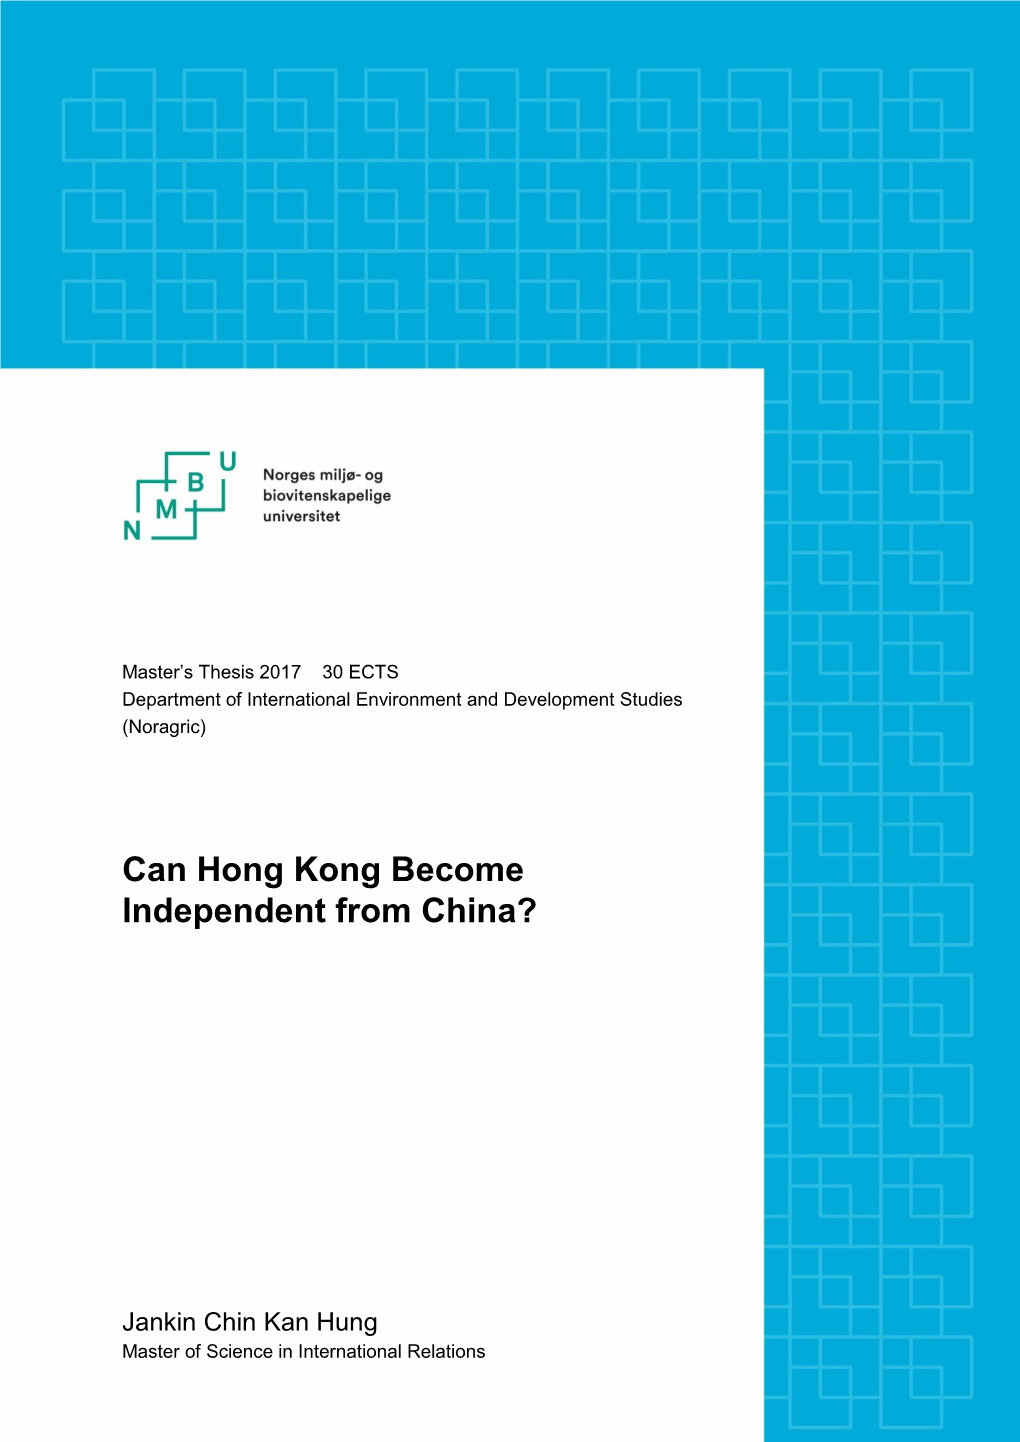 Can Hong Kong Become Independent from China?